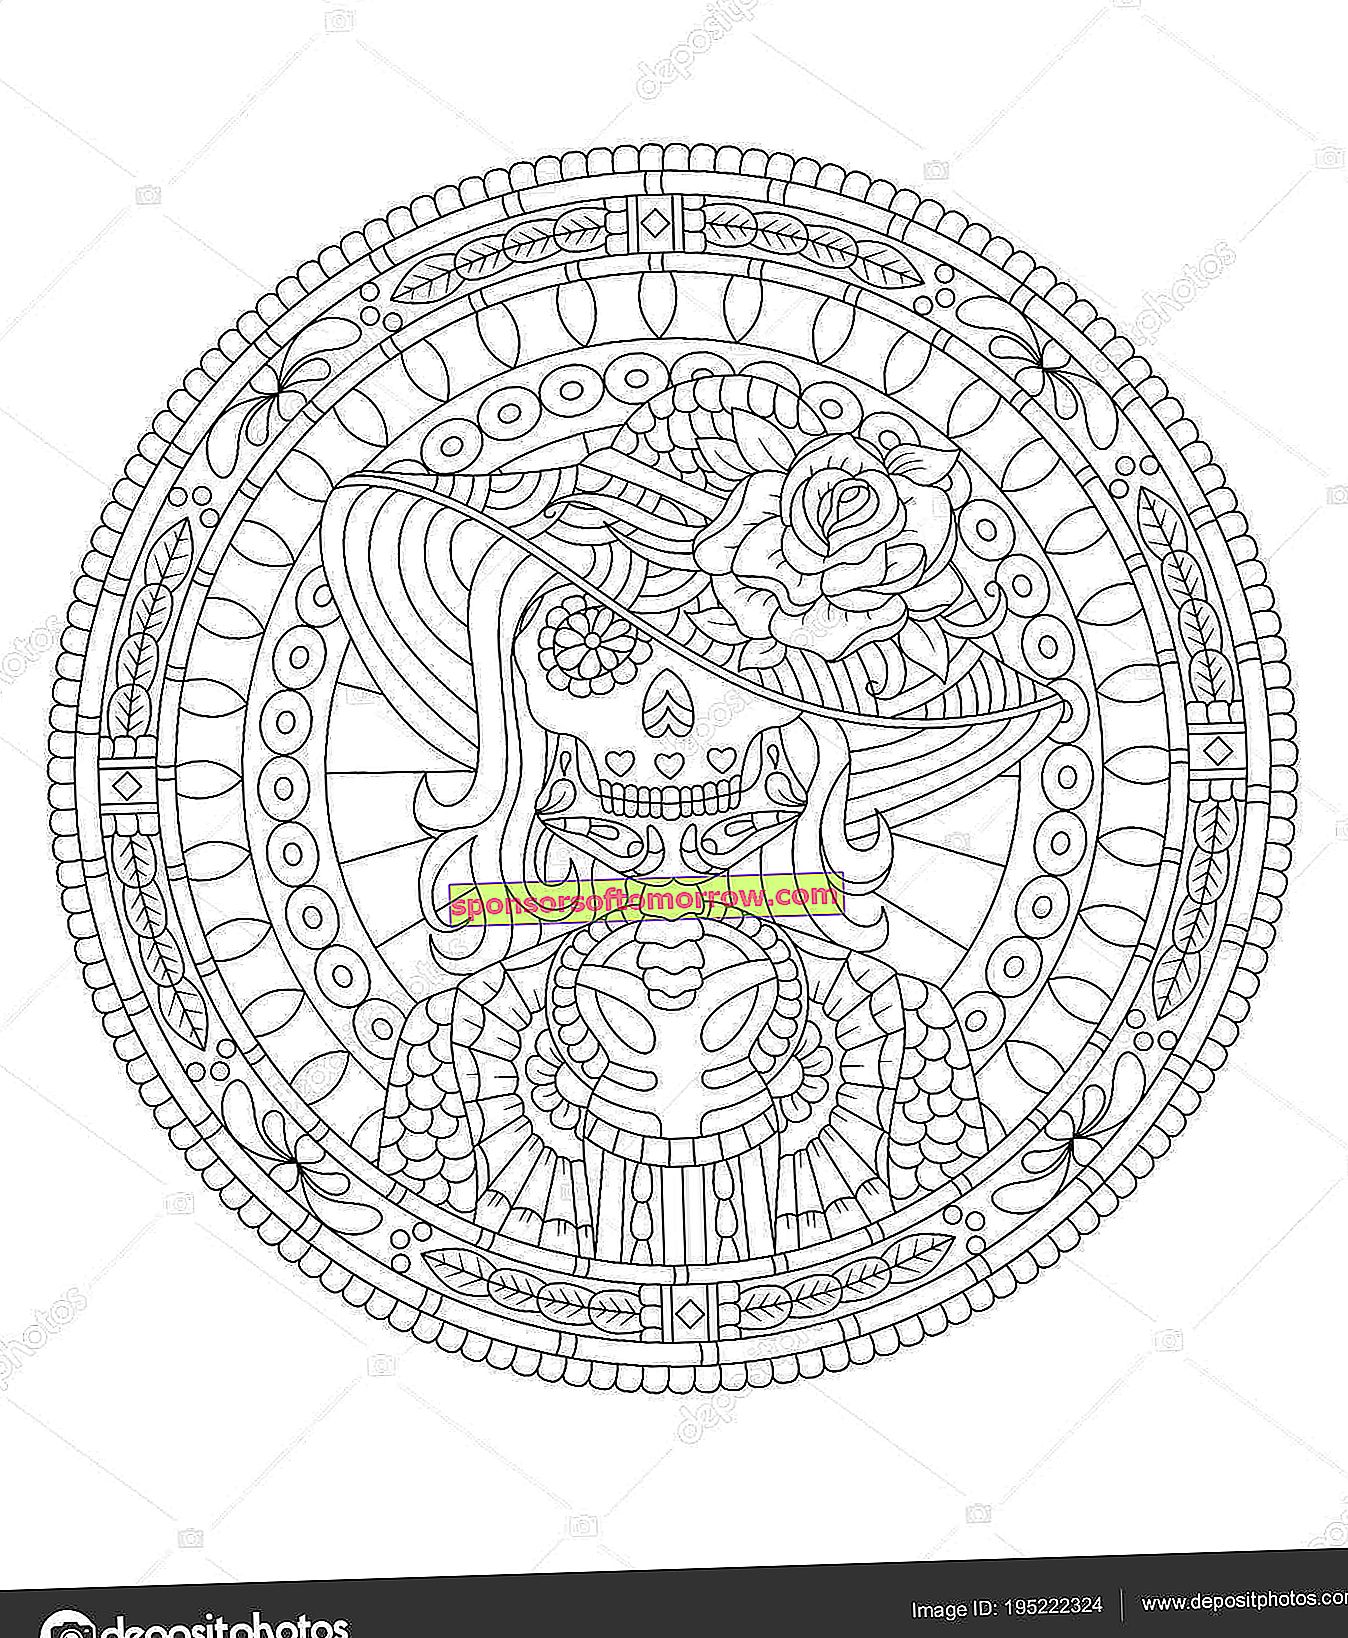 A collection of 20 drawings of mandalas to download and color these days 2